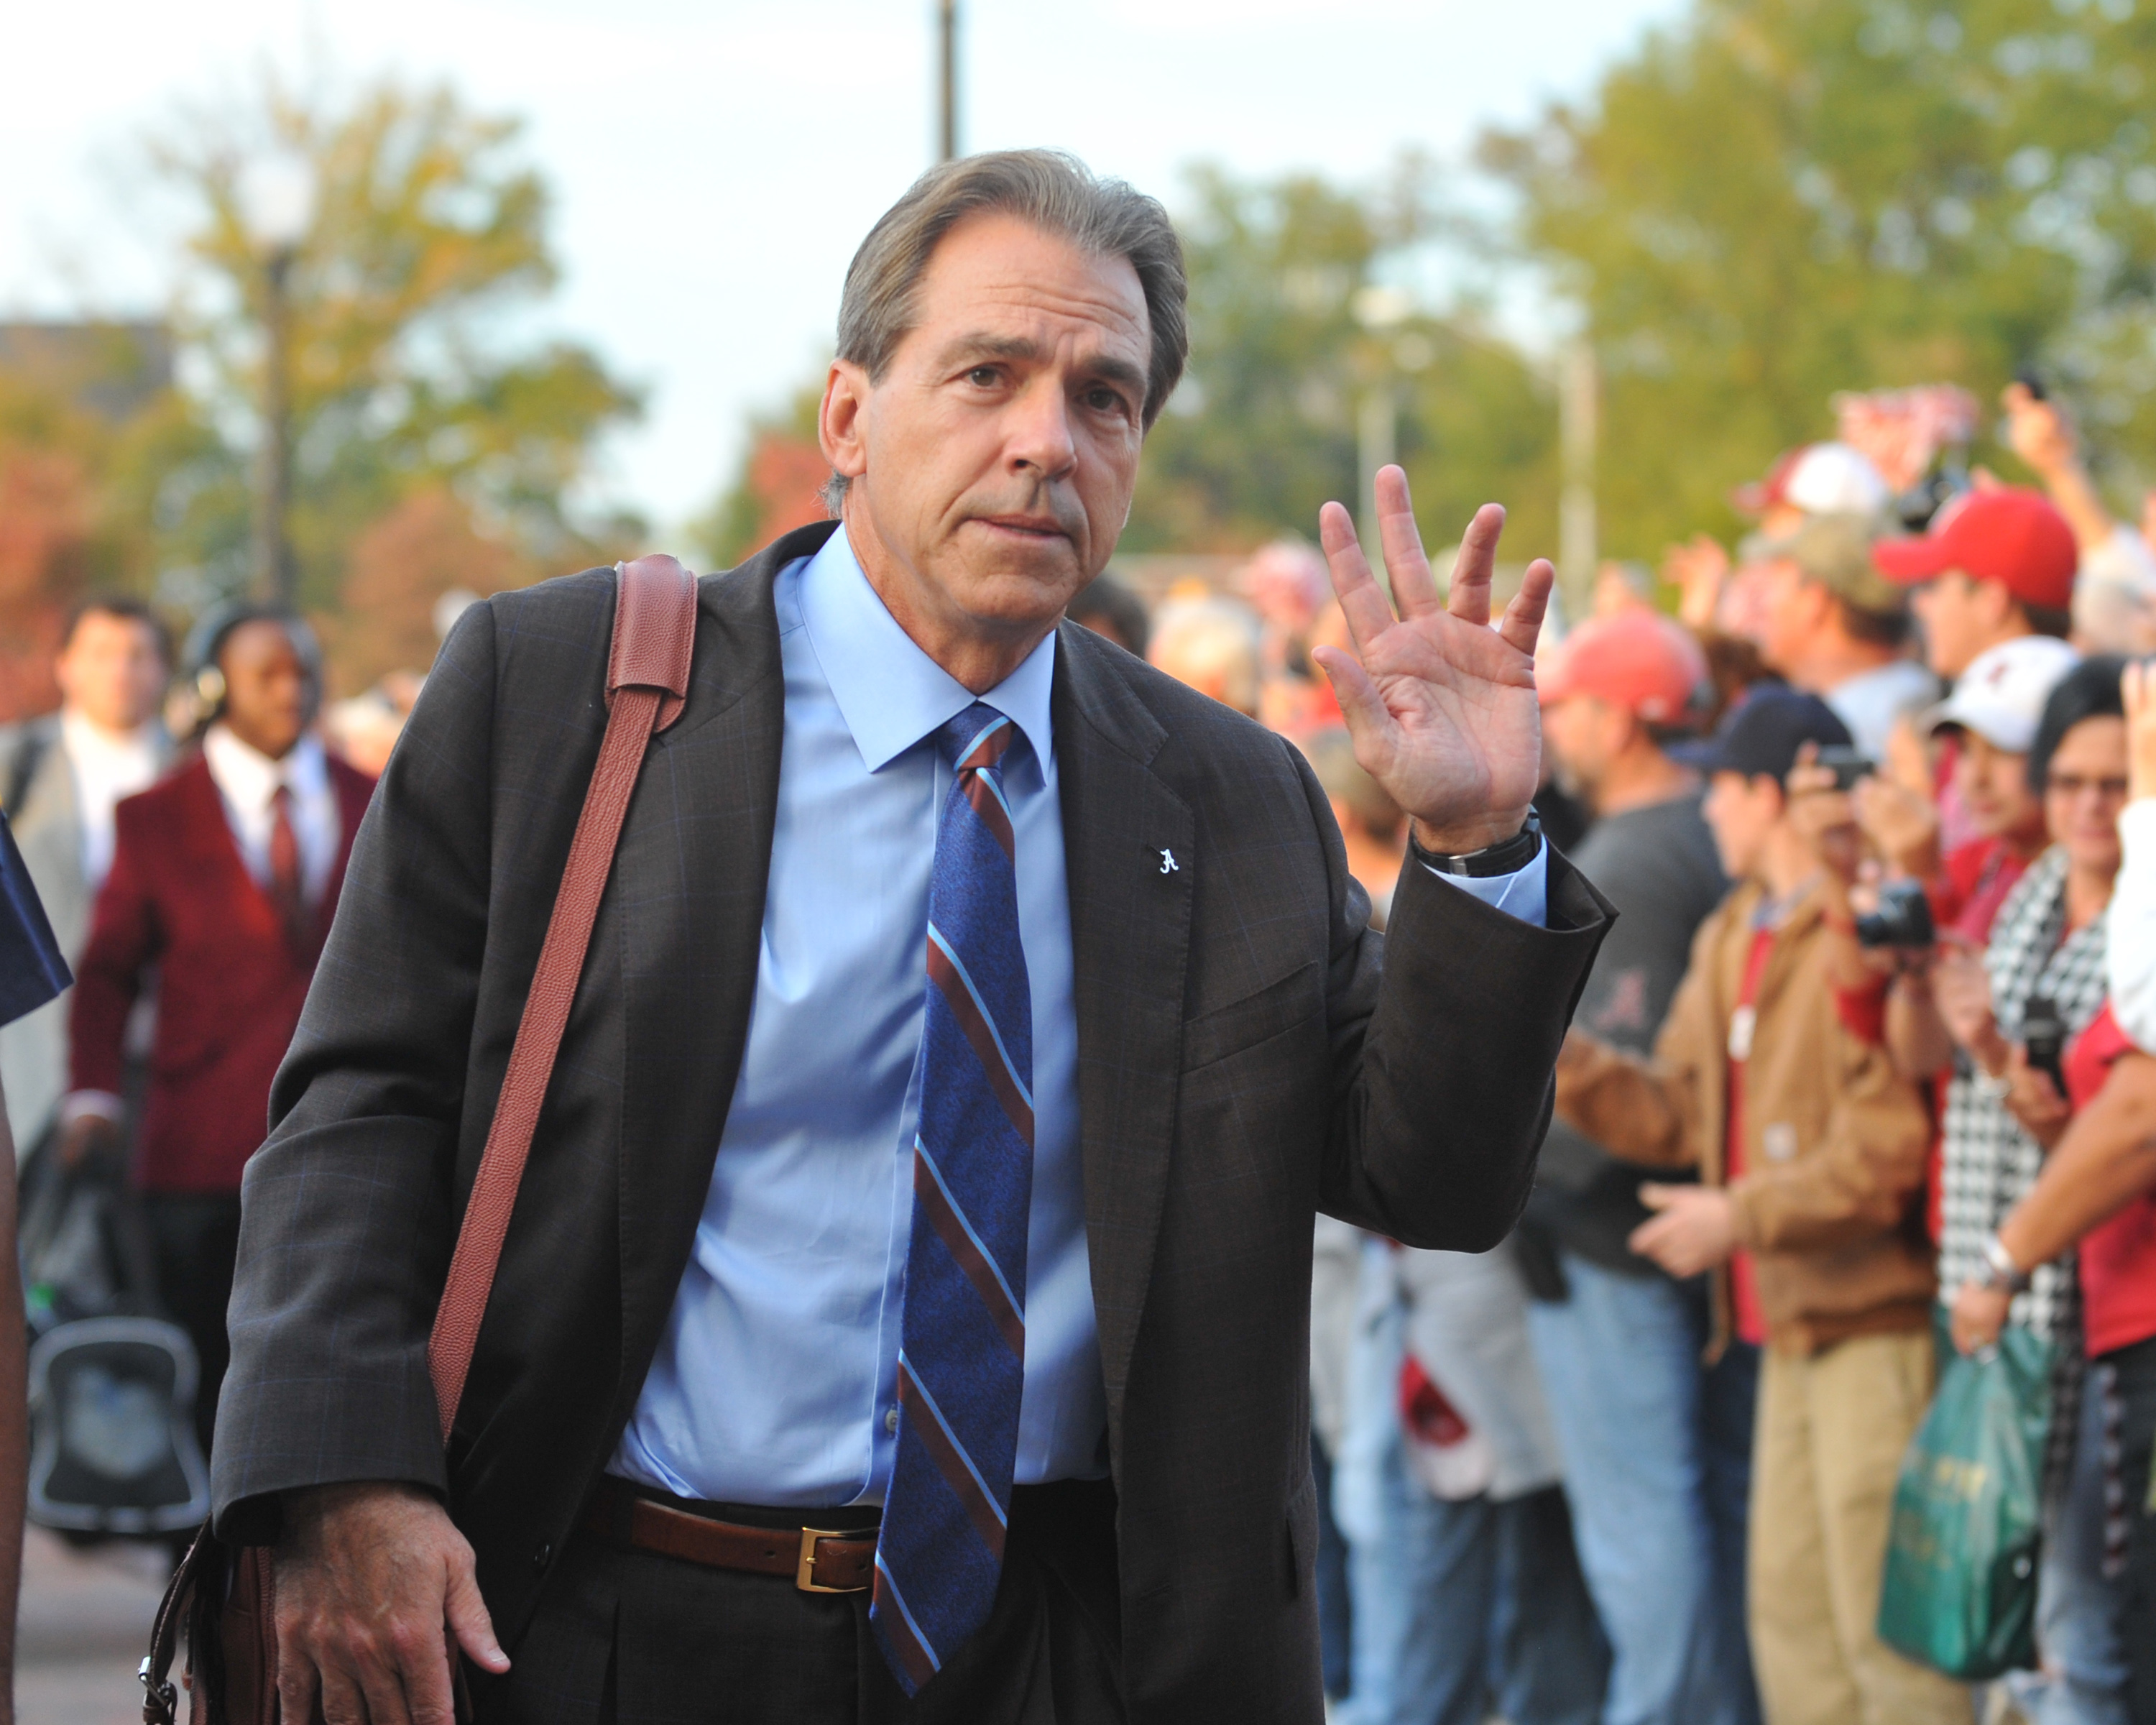 TUSCALOOSA, AL - NOVEMBER 13: Coach Nick Saban of the Alabama Crimson Tide enters the stadium before play against the Mississippi State Bulldogs November 13, 2010 at Bryant-Denny Stadium in Tuscaloosa, Alabama.  (Photo by Al Messerschmidt/Getty Images)